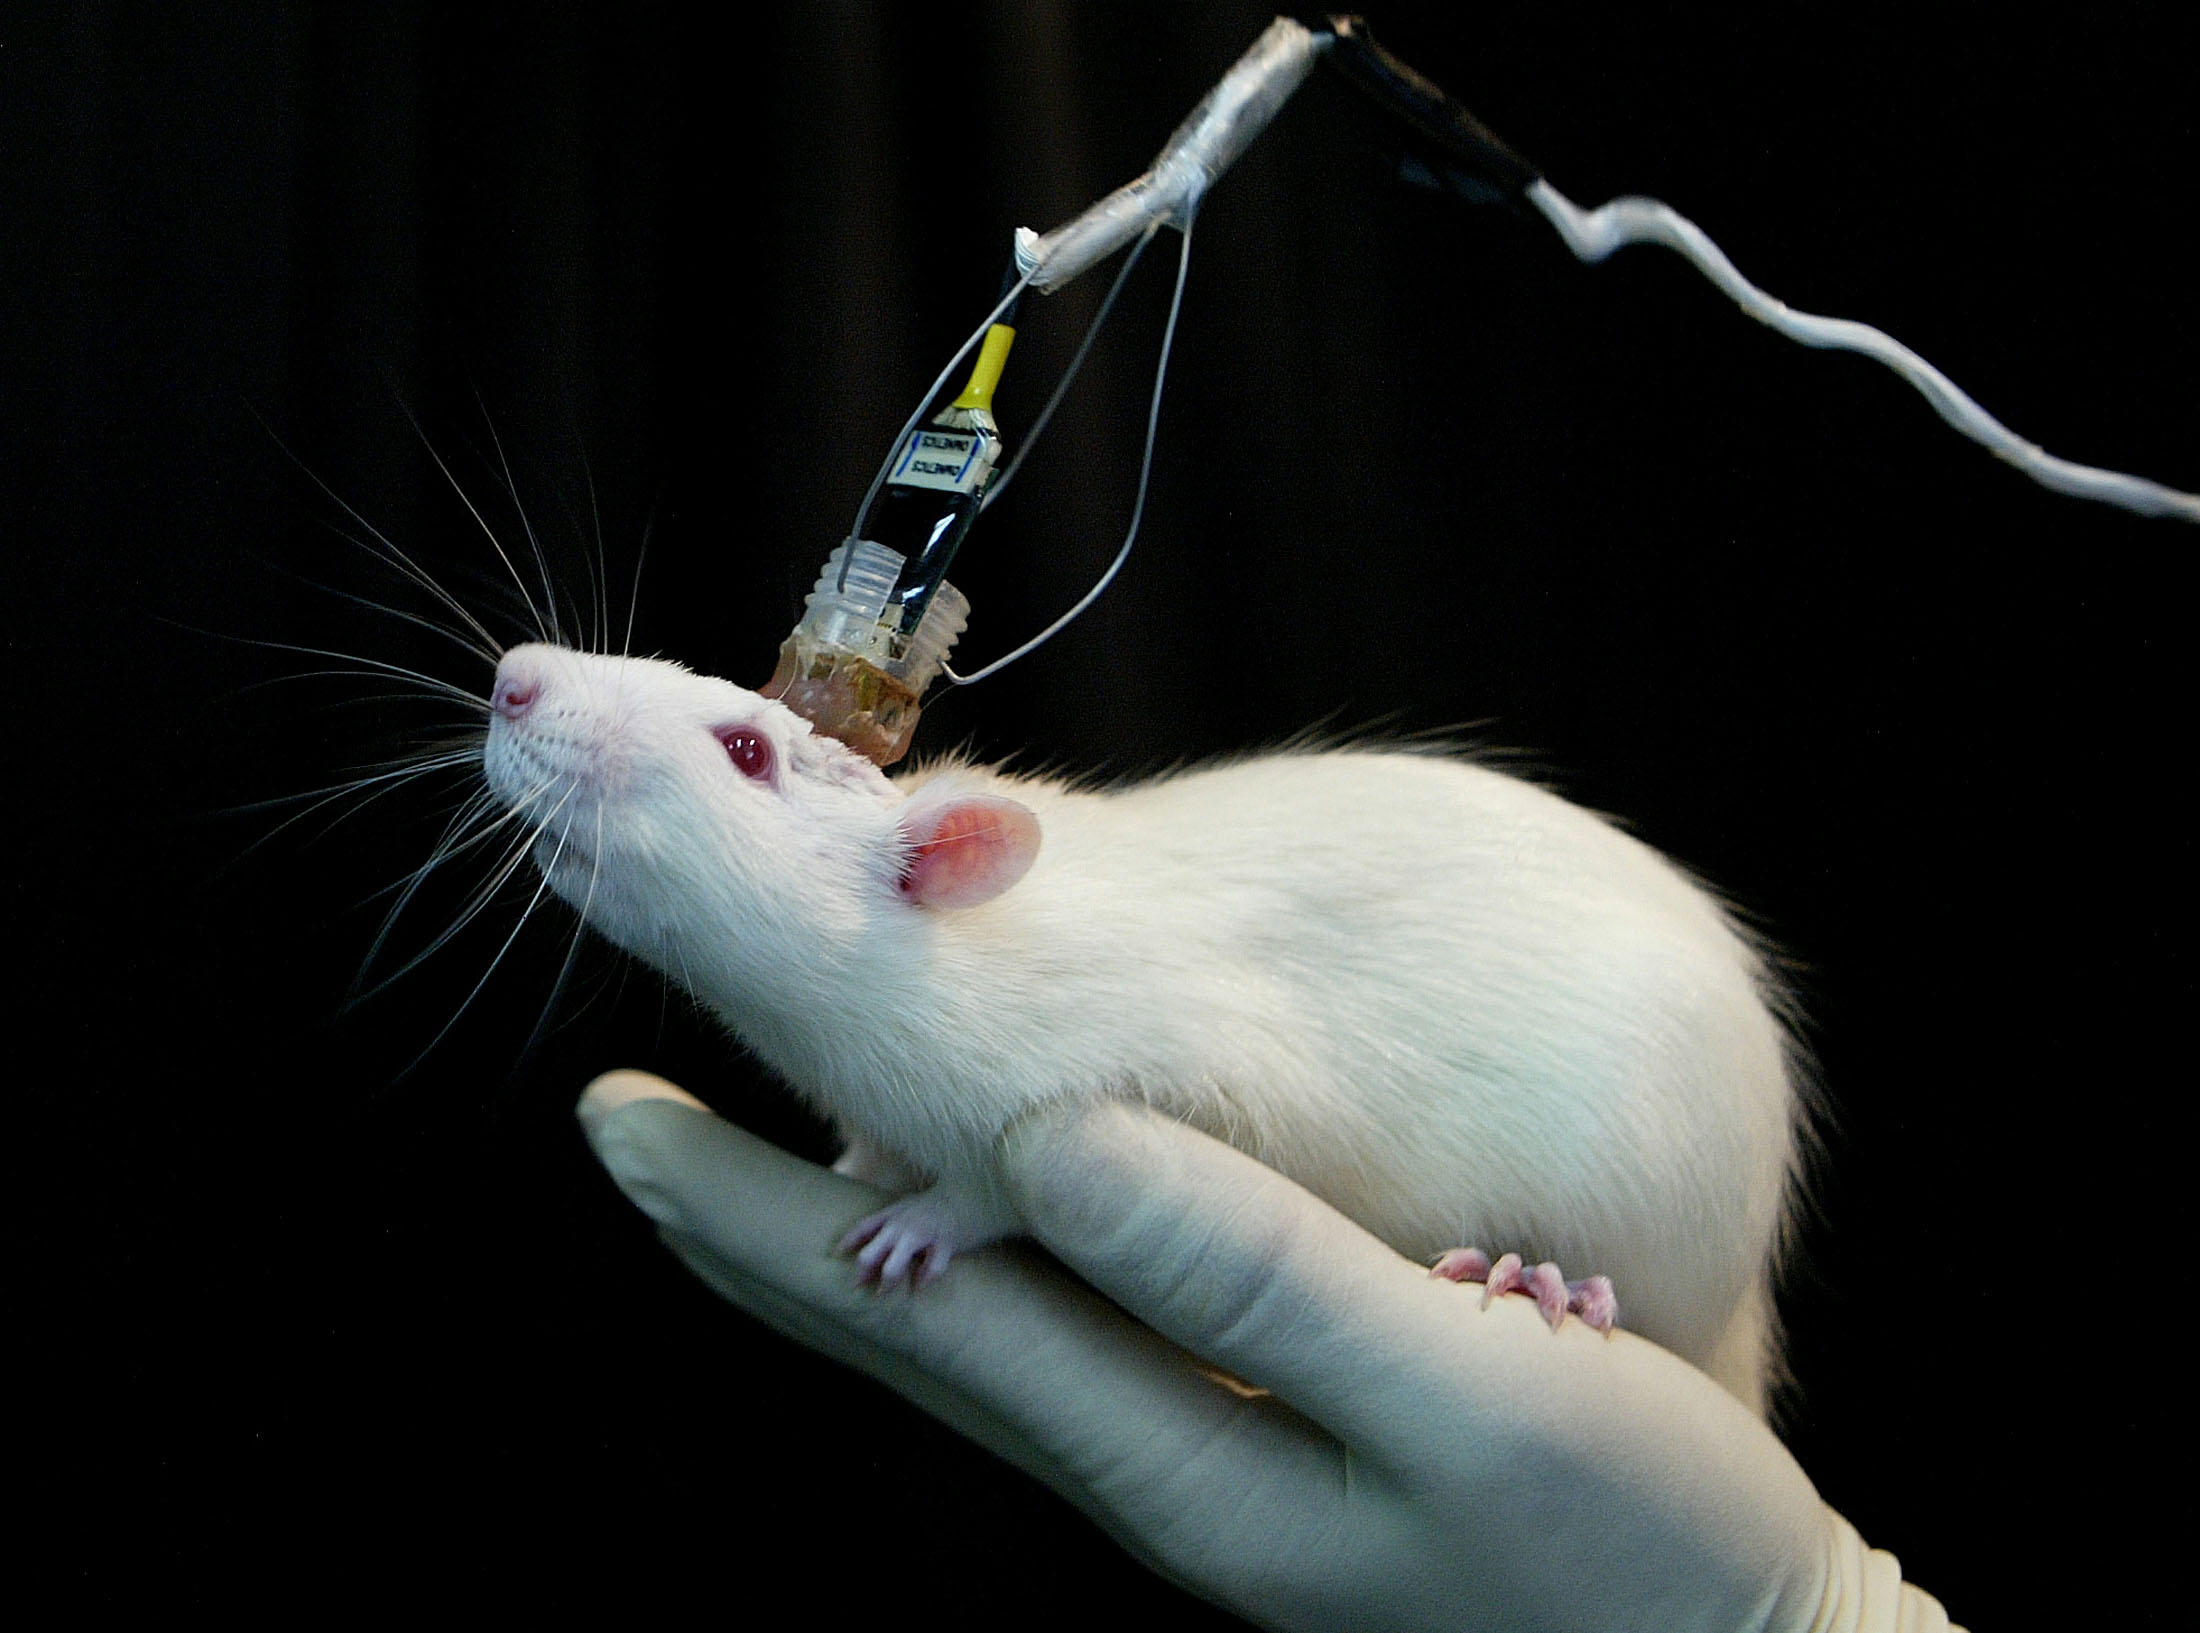 a-mouses-memory-is-recorded-by-sensors-connected-to-its-head